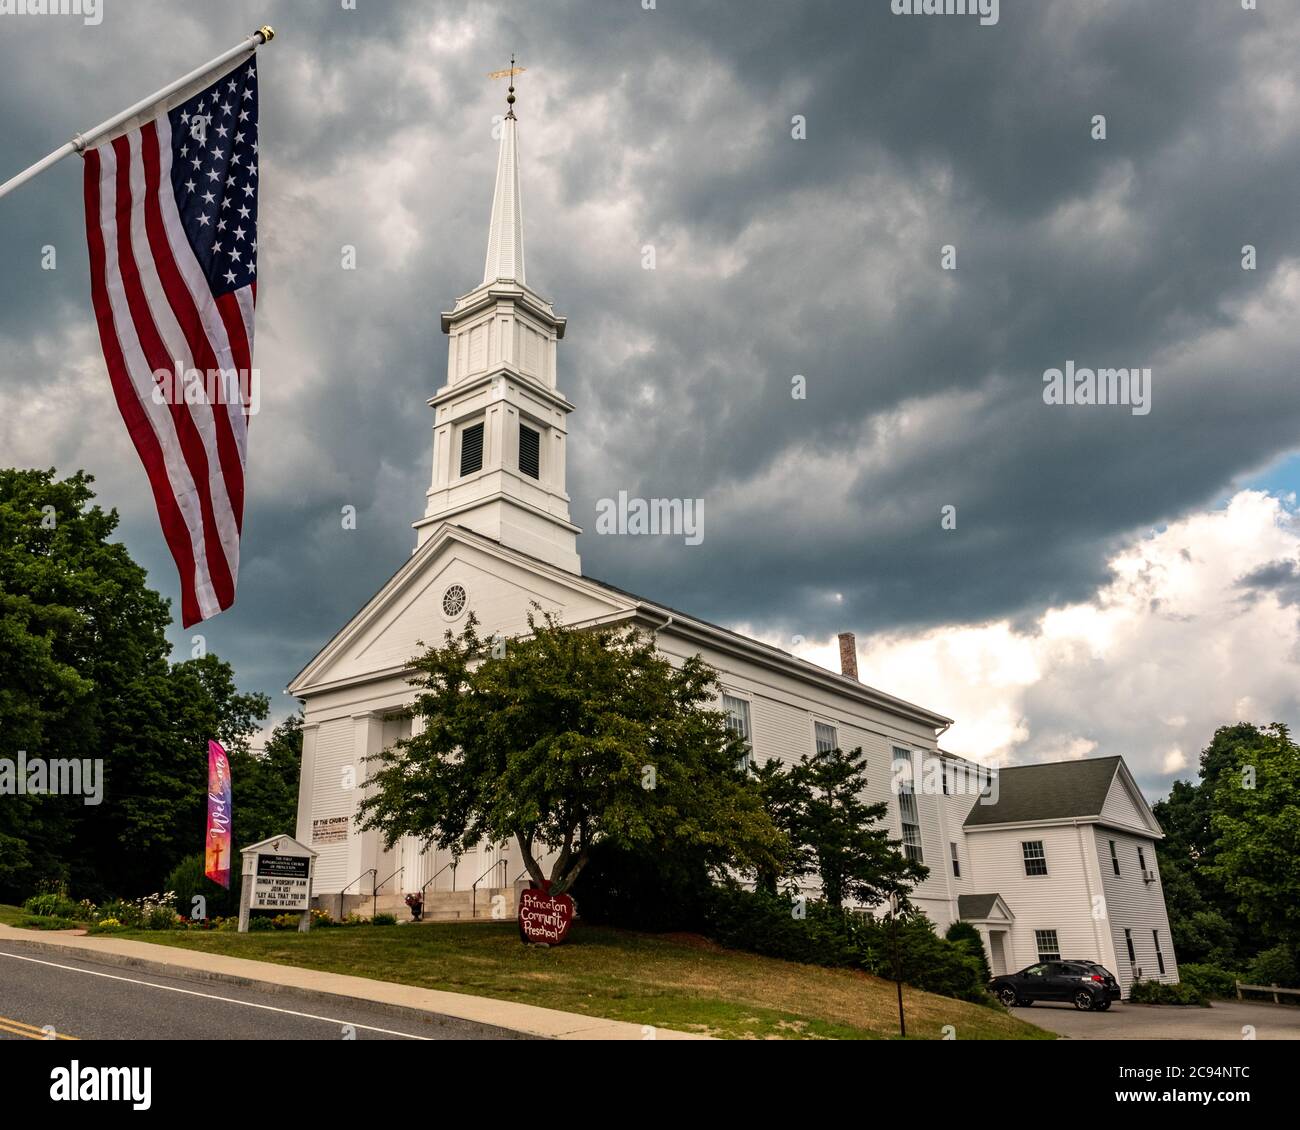 A storm is brewing over the Congregational Church in Princeton, Massachusetts Stock Photo